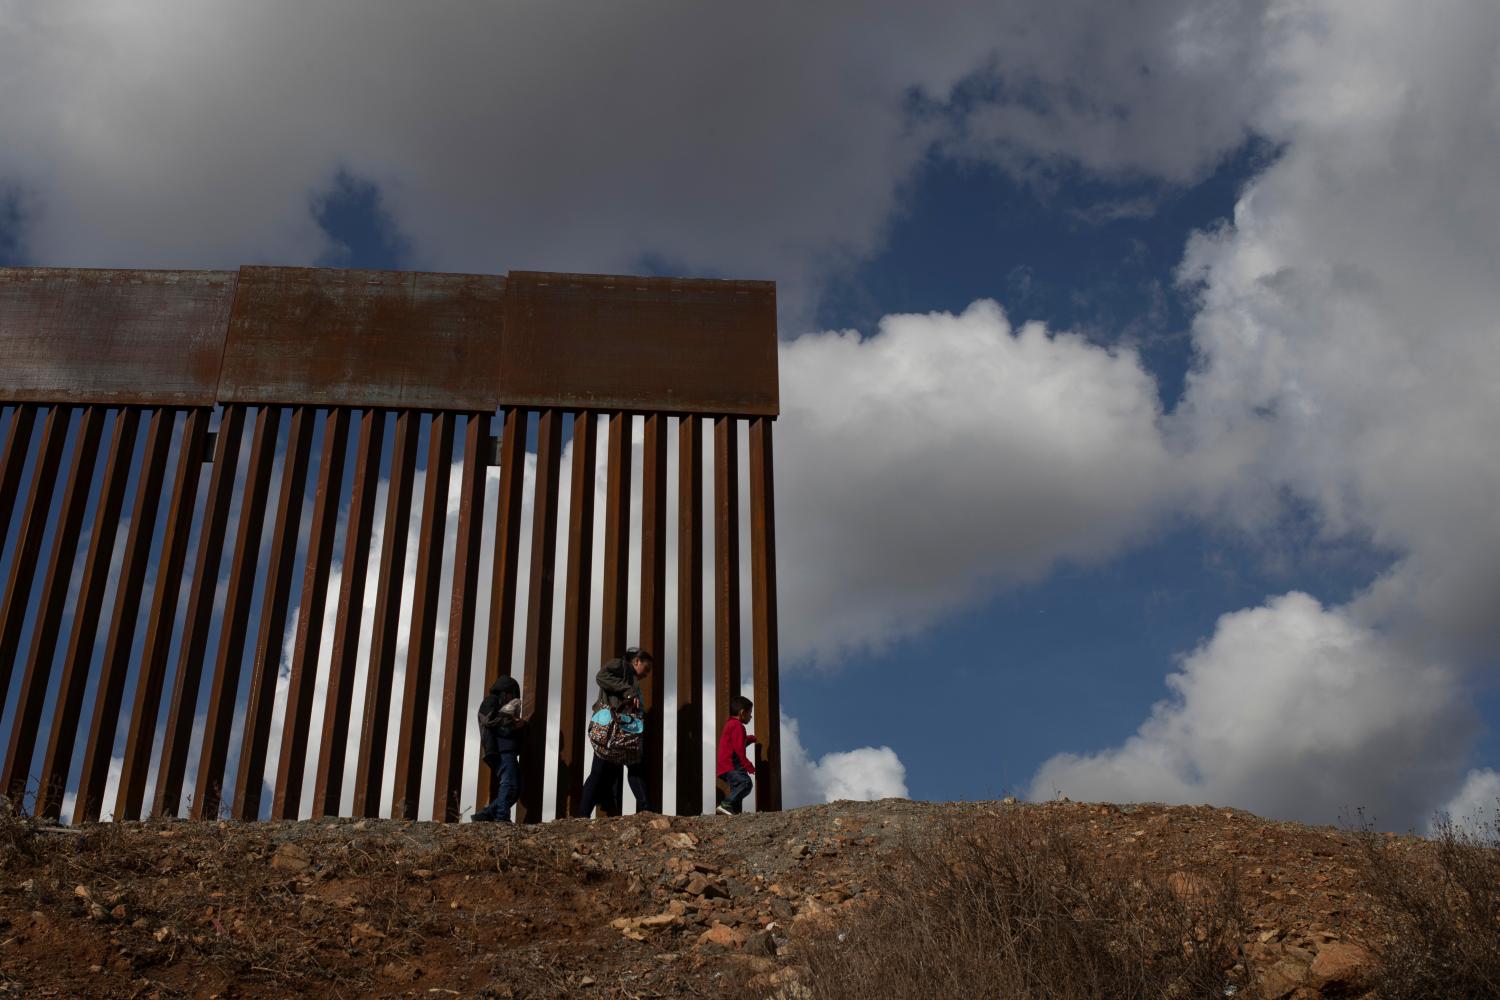 Jessica, a migrant woman from Guatemala seeking asylum, walks to the edge of the border wall before illegally crossing into the United States with her sons Francisco, 5, and Jorge, 9, from the outskirts of Tijuana into San Diego County December 1, 2018. Picture taken December 1, 2018.   REUTERS/Adrees Latif - RC1C78F00810